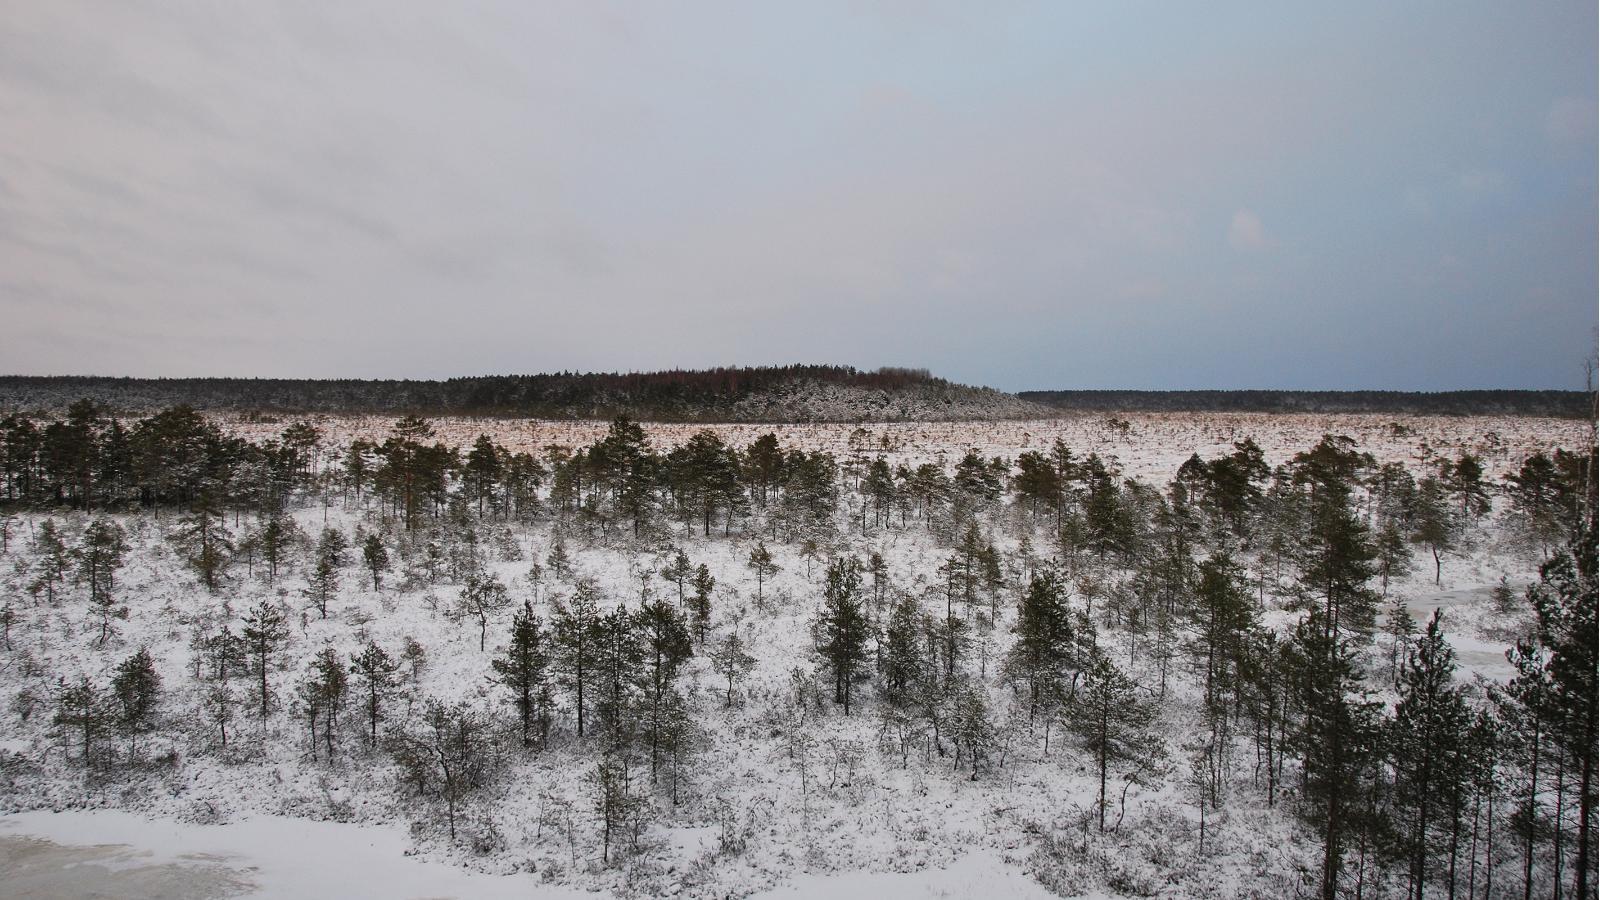 View of Lindi bog from the observation tower during winter